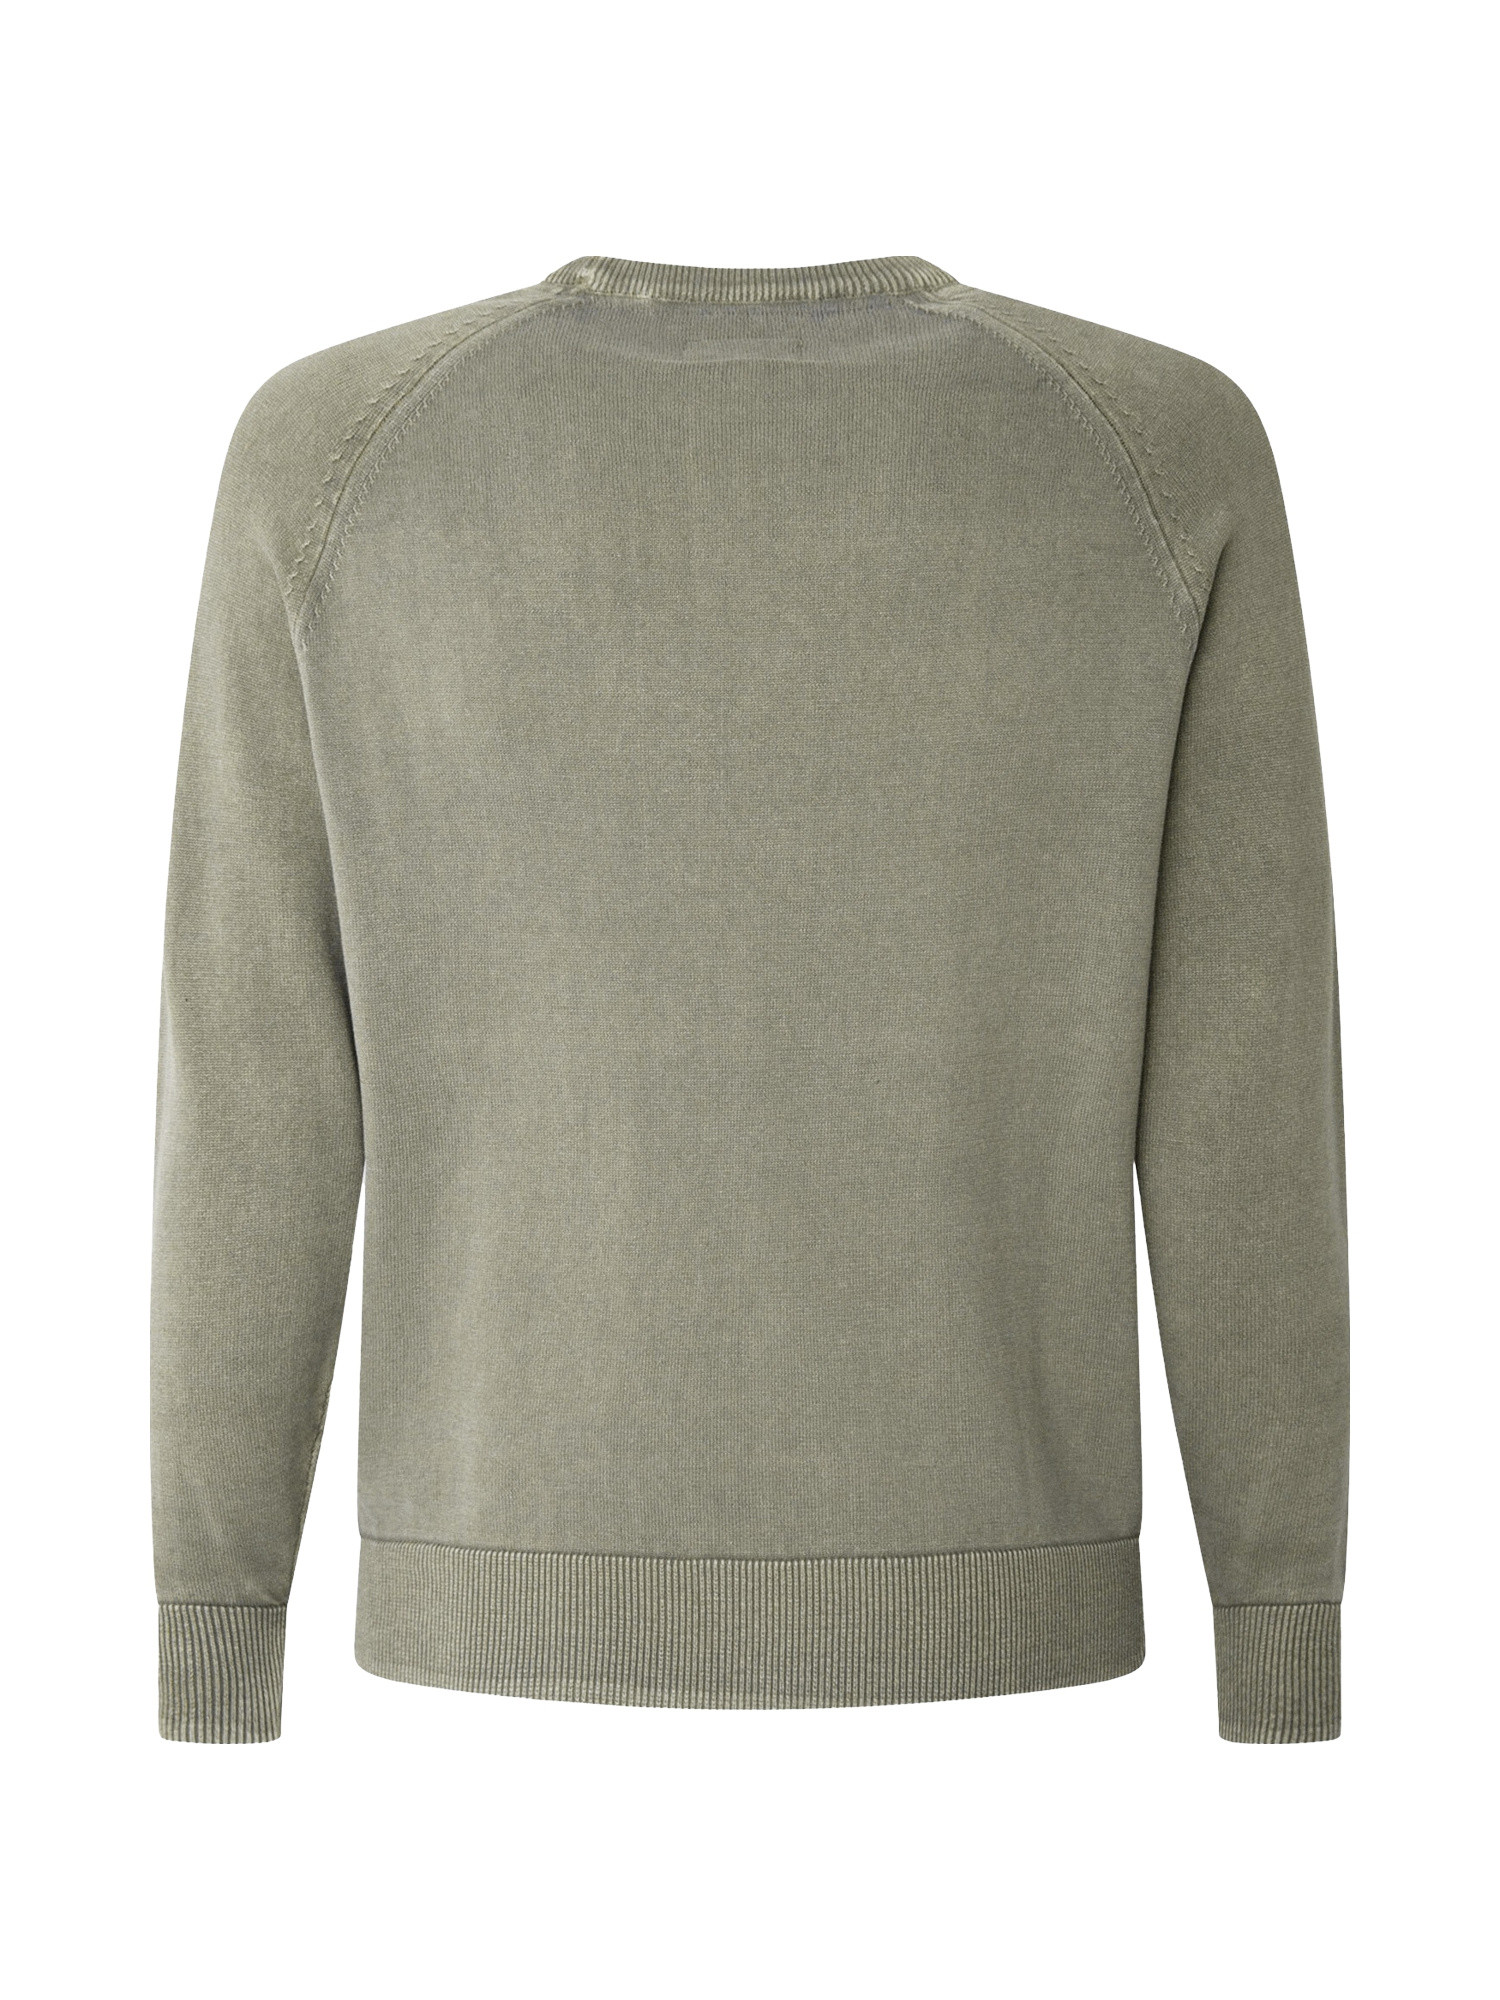 Pepe Jeans - Crewneck cotton pullover, Green, large image number 1